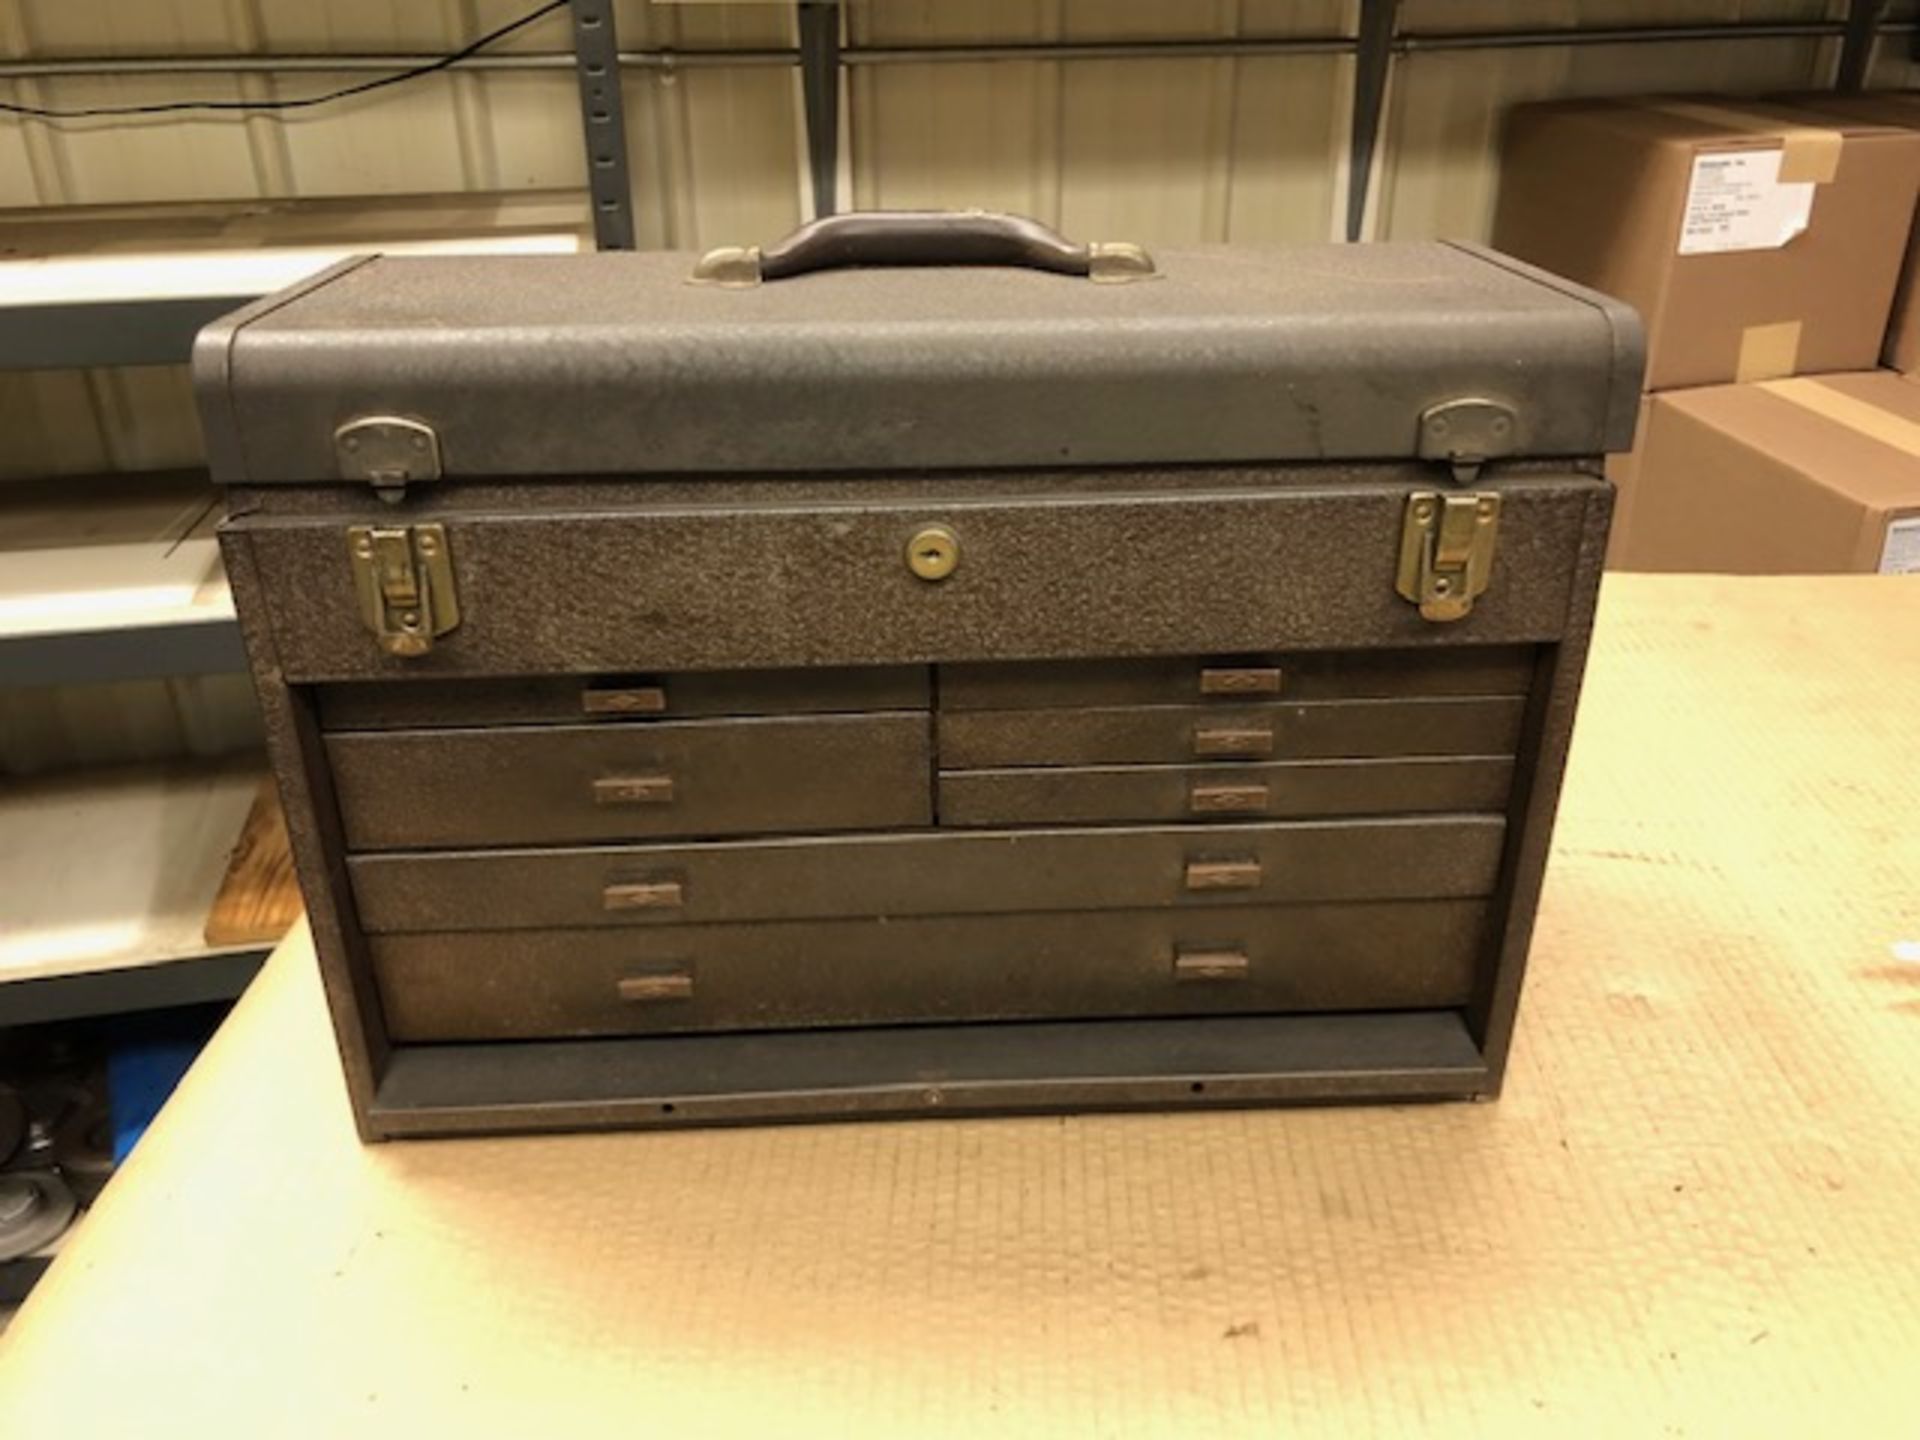 Kennedy Machinest Bench Top Tool Box and Contents, 20" x 9" x 15" High